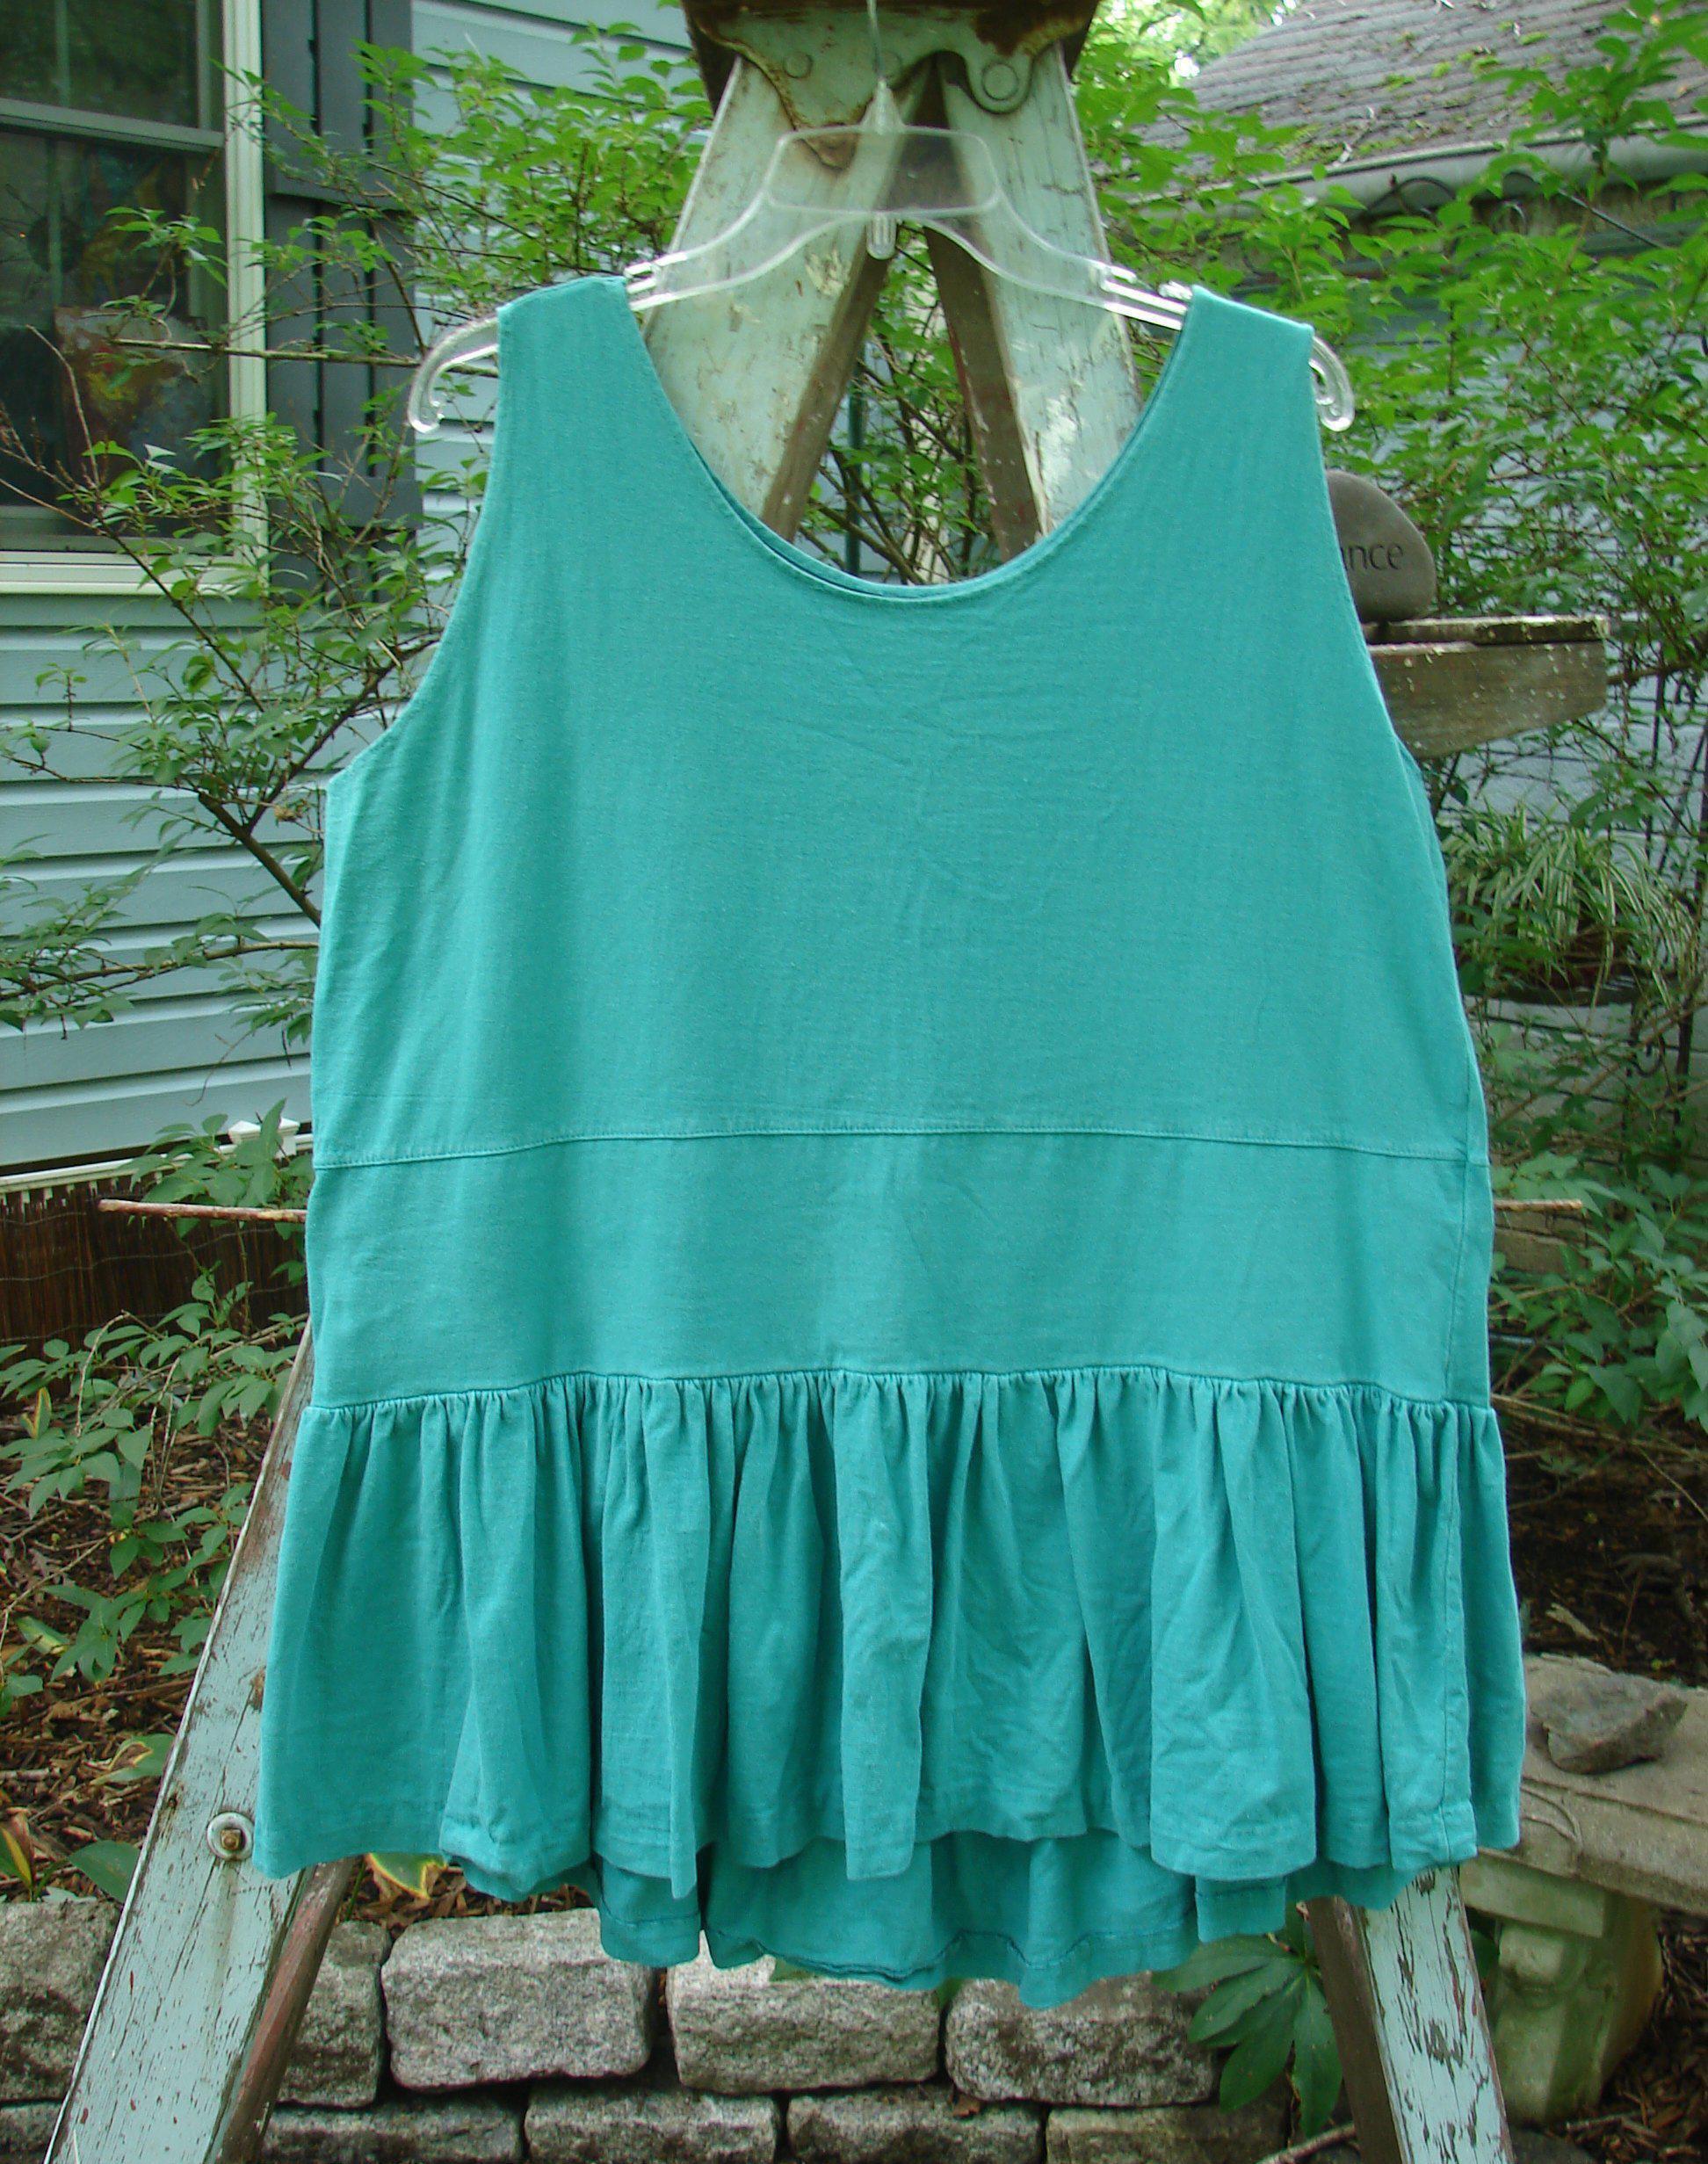 A vintage 1990 Button Tier Top in Turq, featuring a gathered flounce, drop waistband, and ruffled hemline. OSFA.